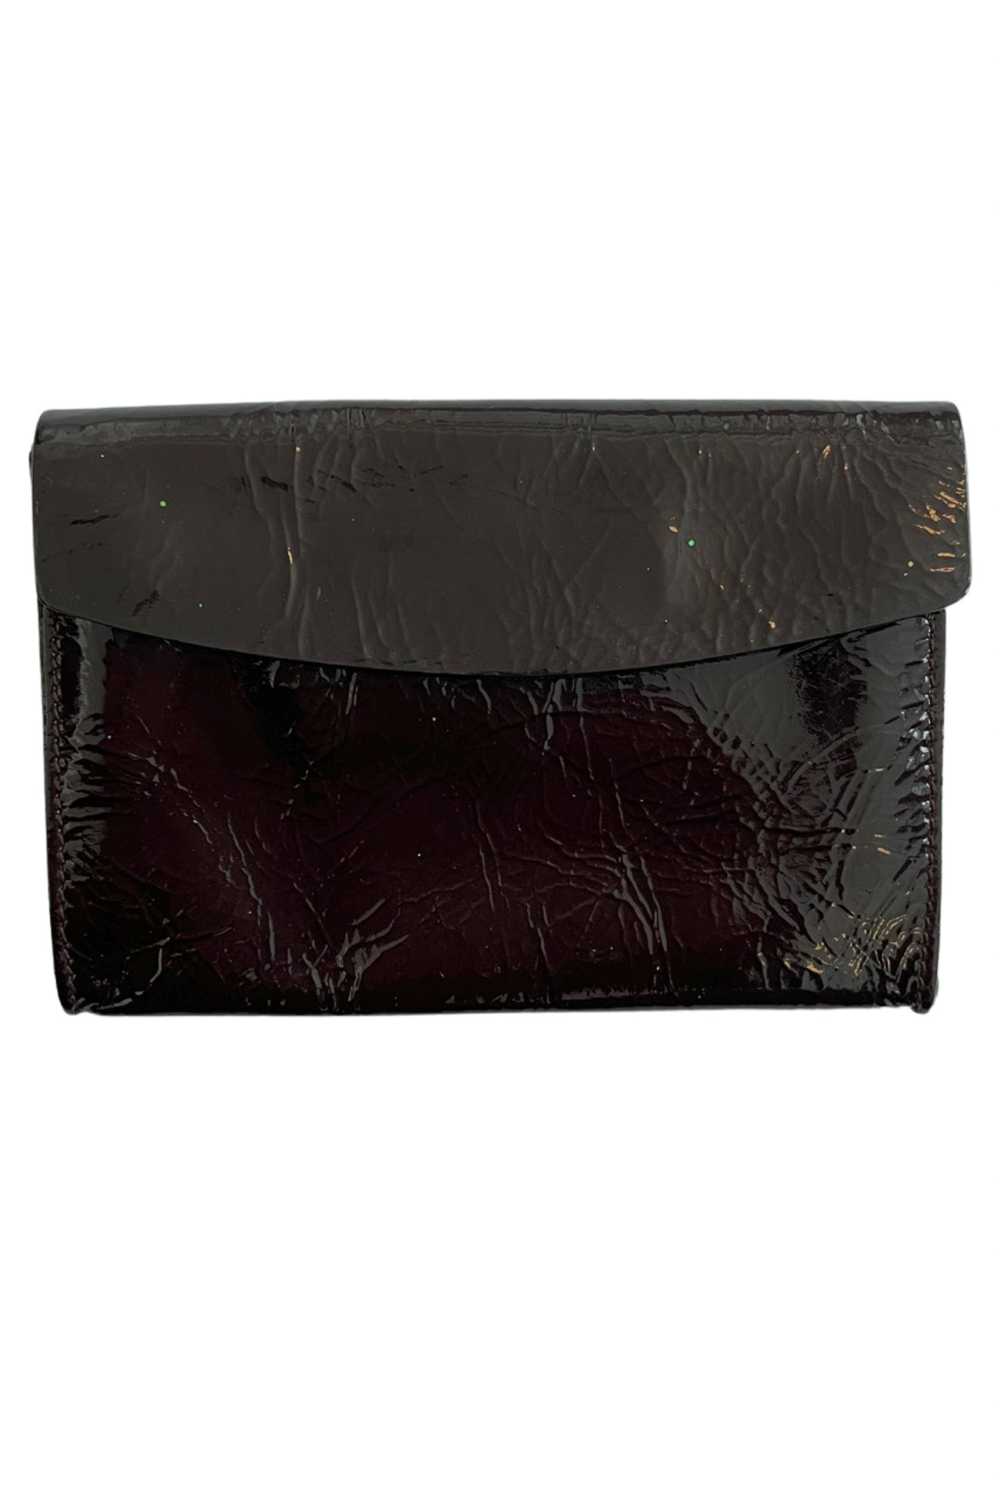 MIU MIU BROWN PATENT LEATHER PSYCHEDELIC WAIST BA… - image 3